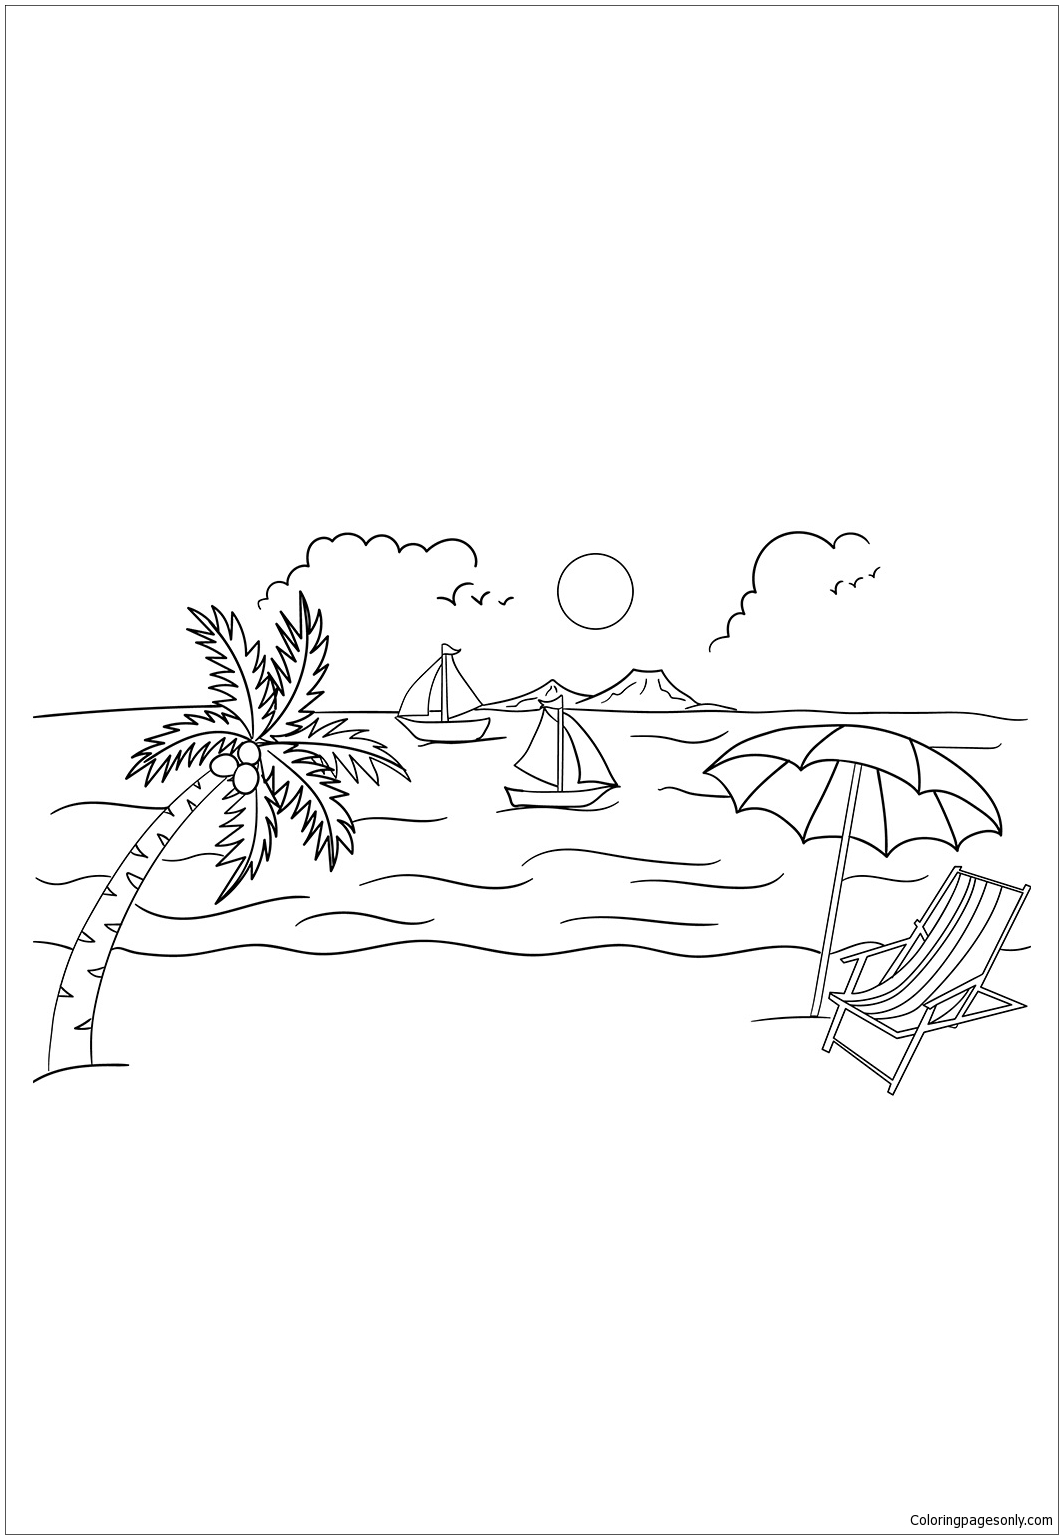 Summer Time During Sun Set Coloring Page